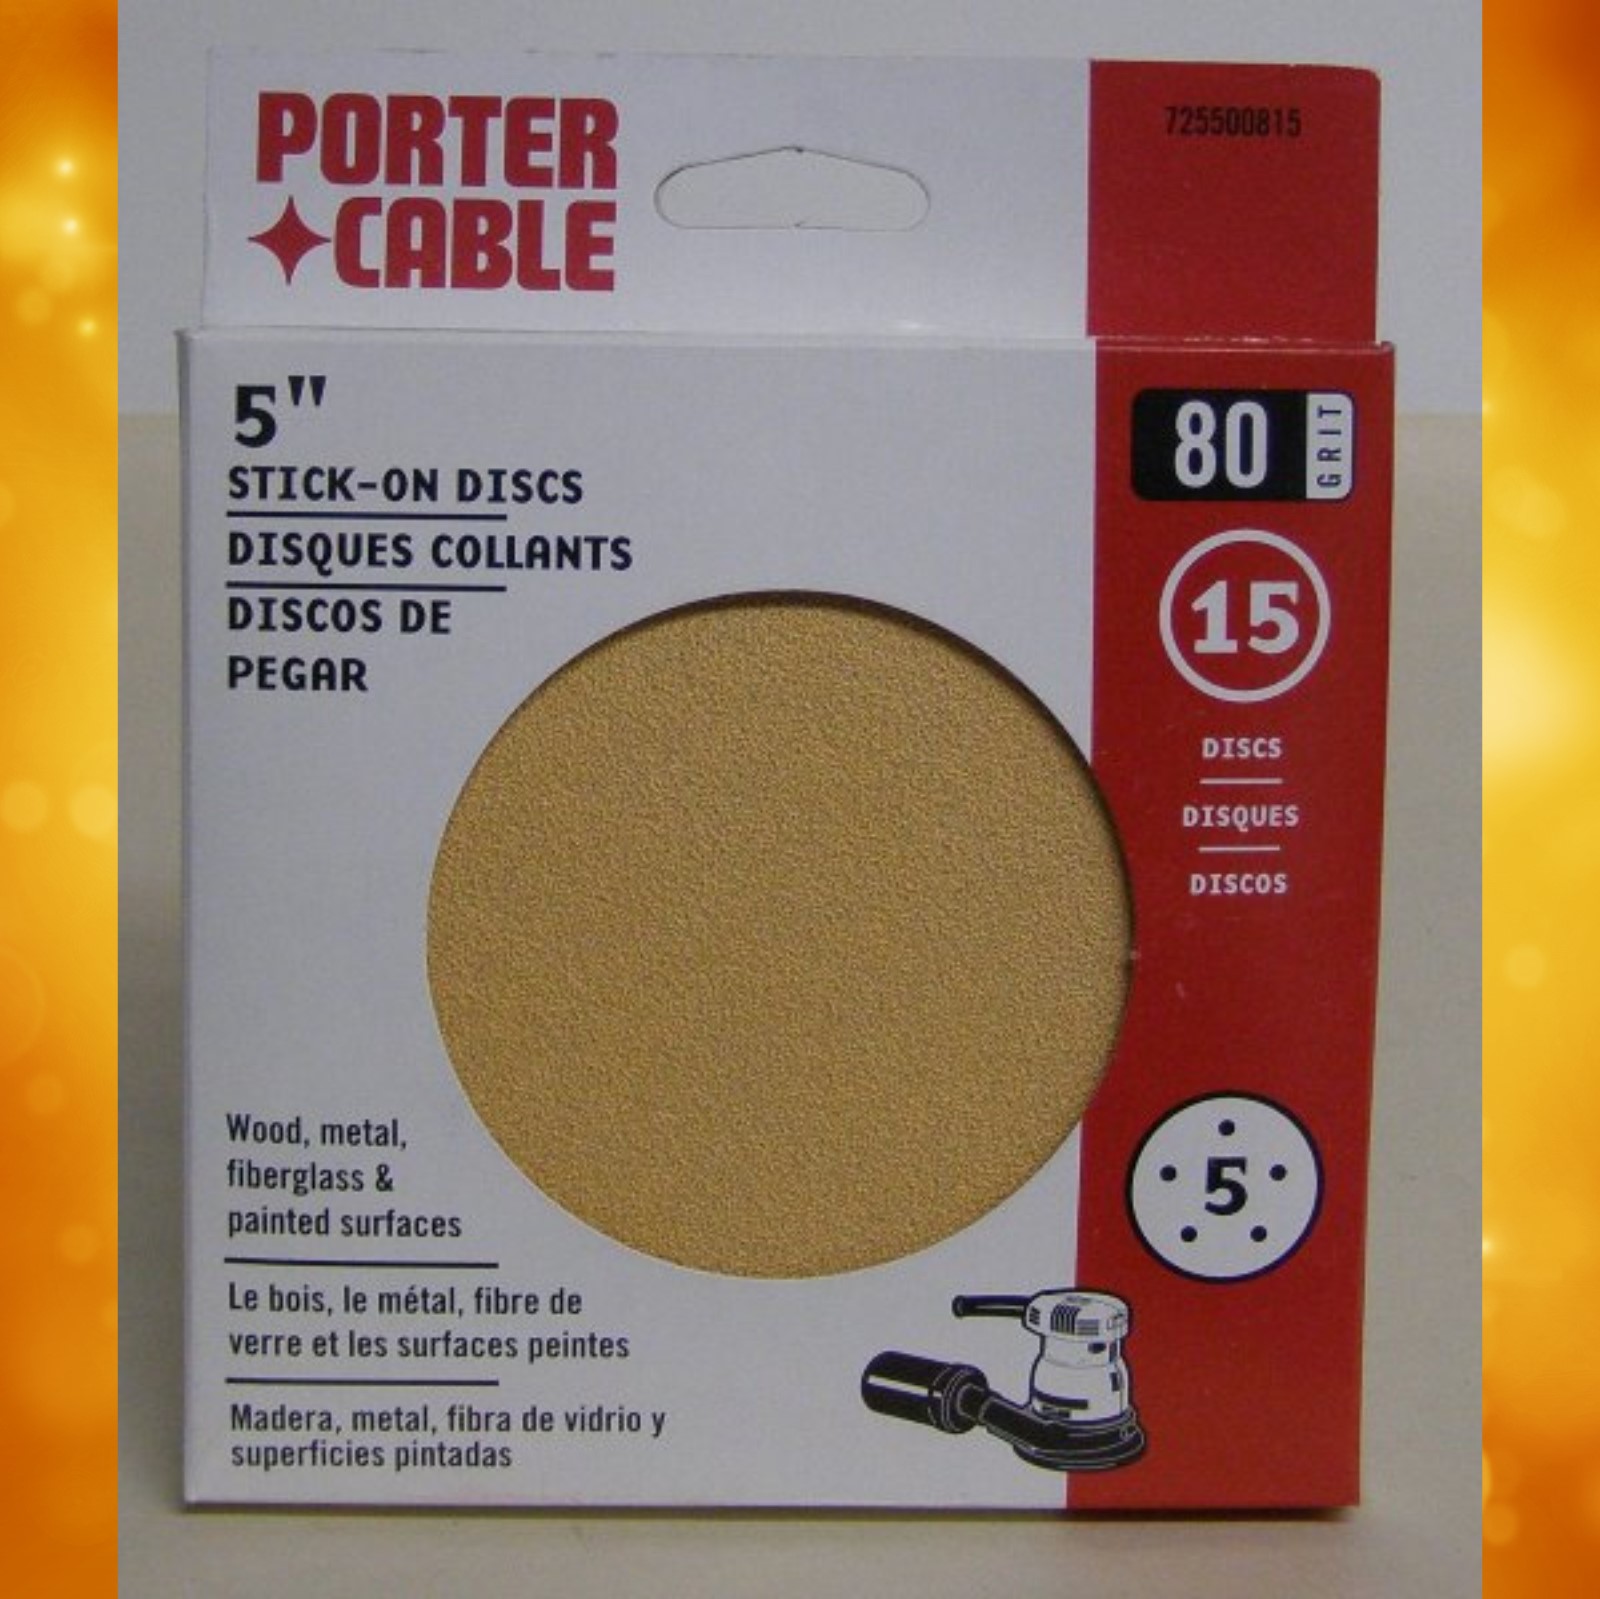 Porter-Cable 5" No-Hole, Adhesive-Backed Sanding Discs - 80 Grit (15 Pack) 725000815